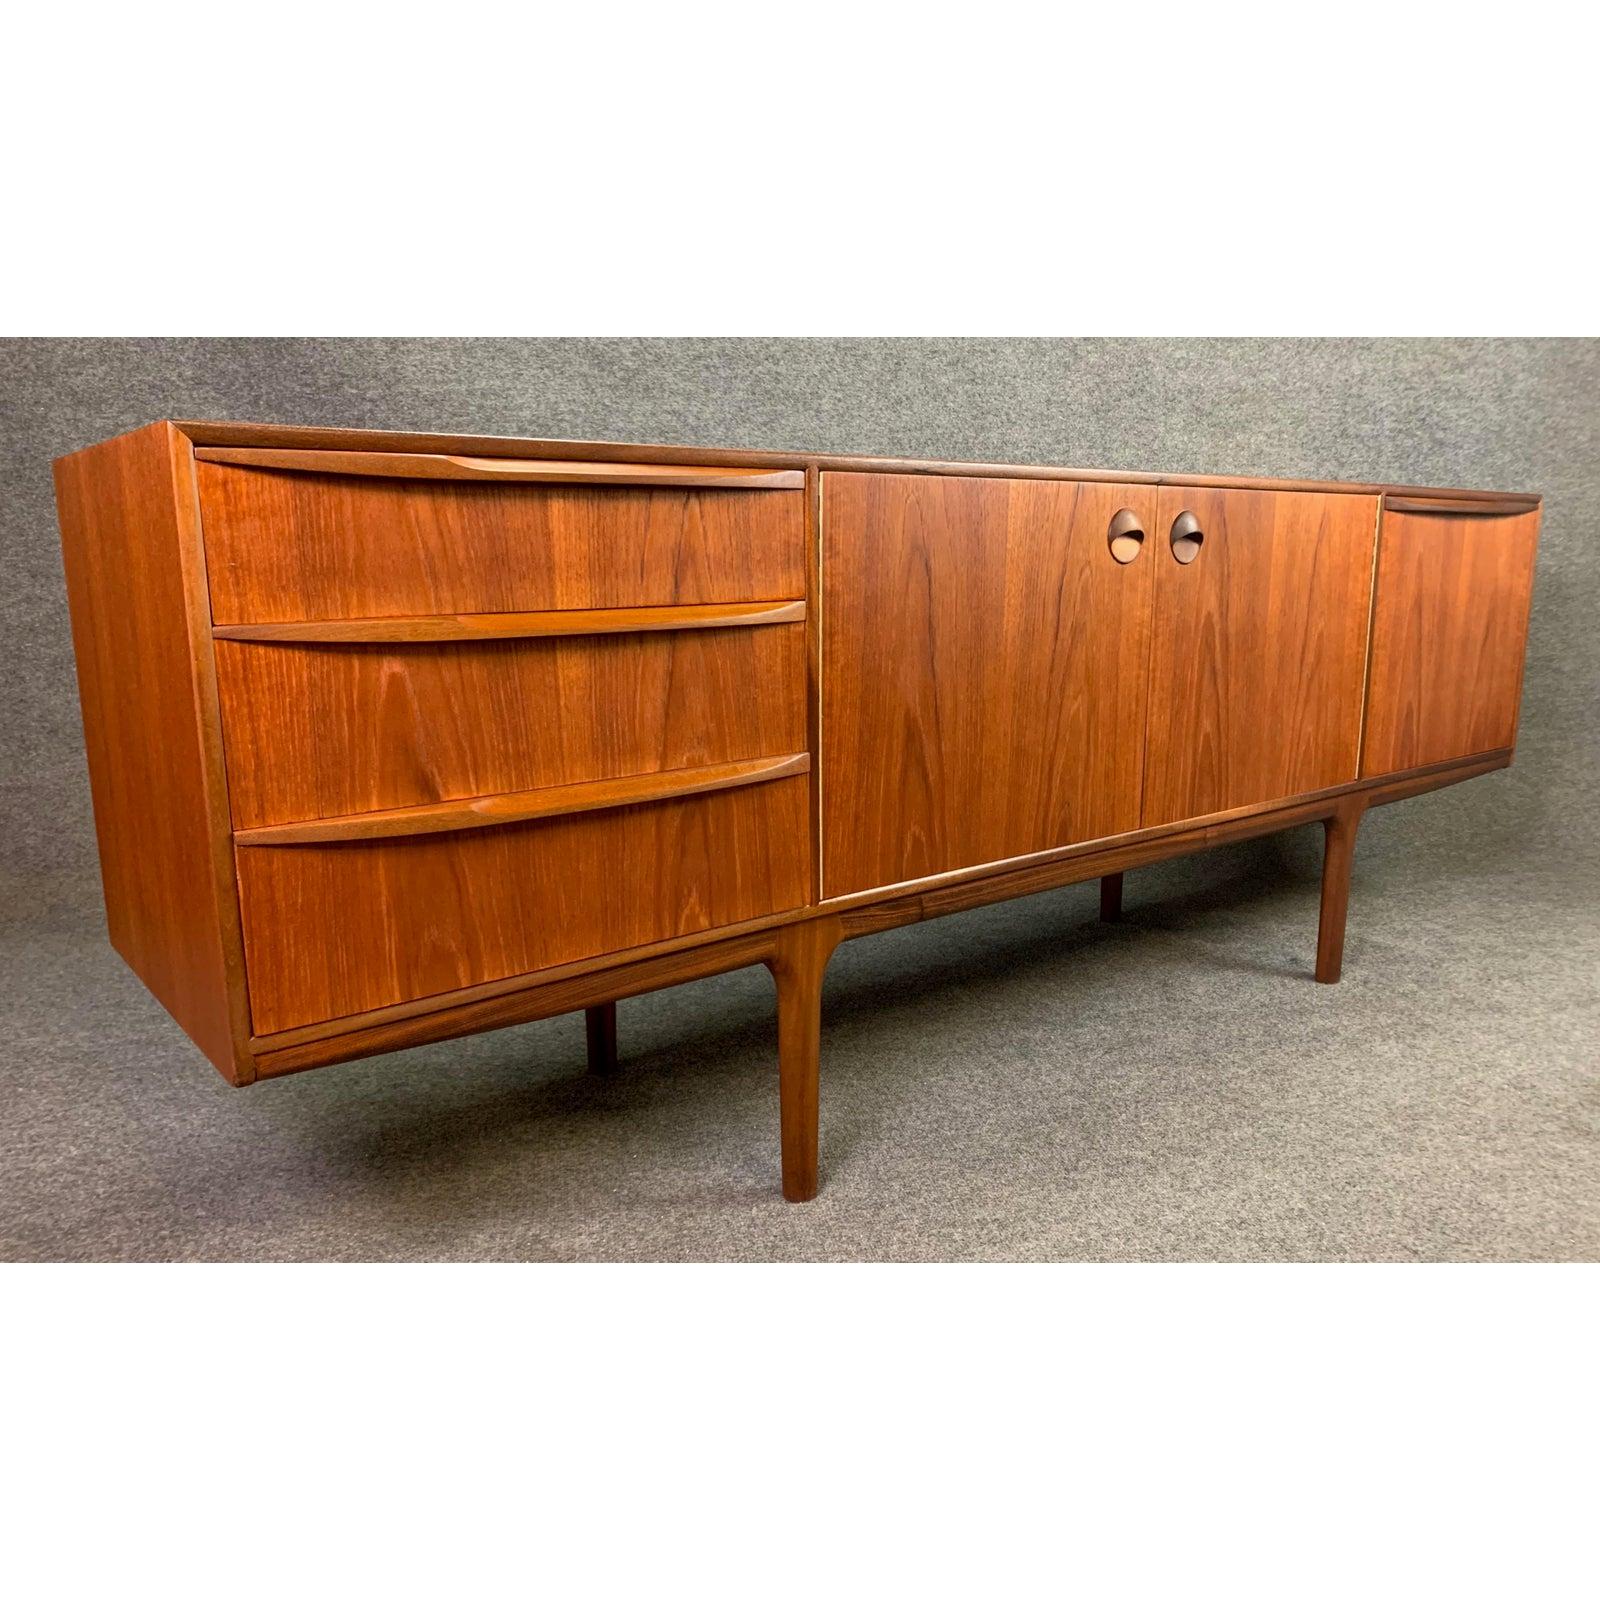 Here is another Classic example of a collectible long teak sideboard designed by Tom Robertson and manufactured by A. H. McIntosh in the 1960s in Scotland. This organically designed credenza features beautiful sculpted handles on each drawers and